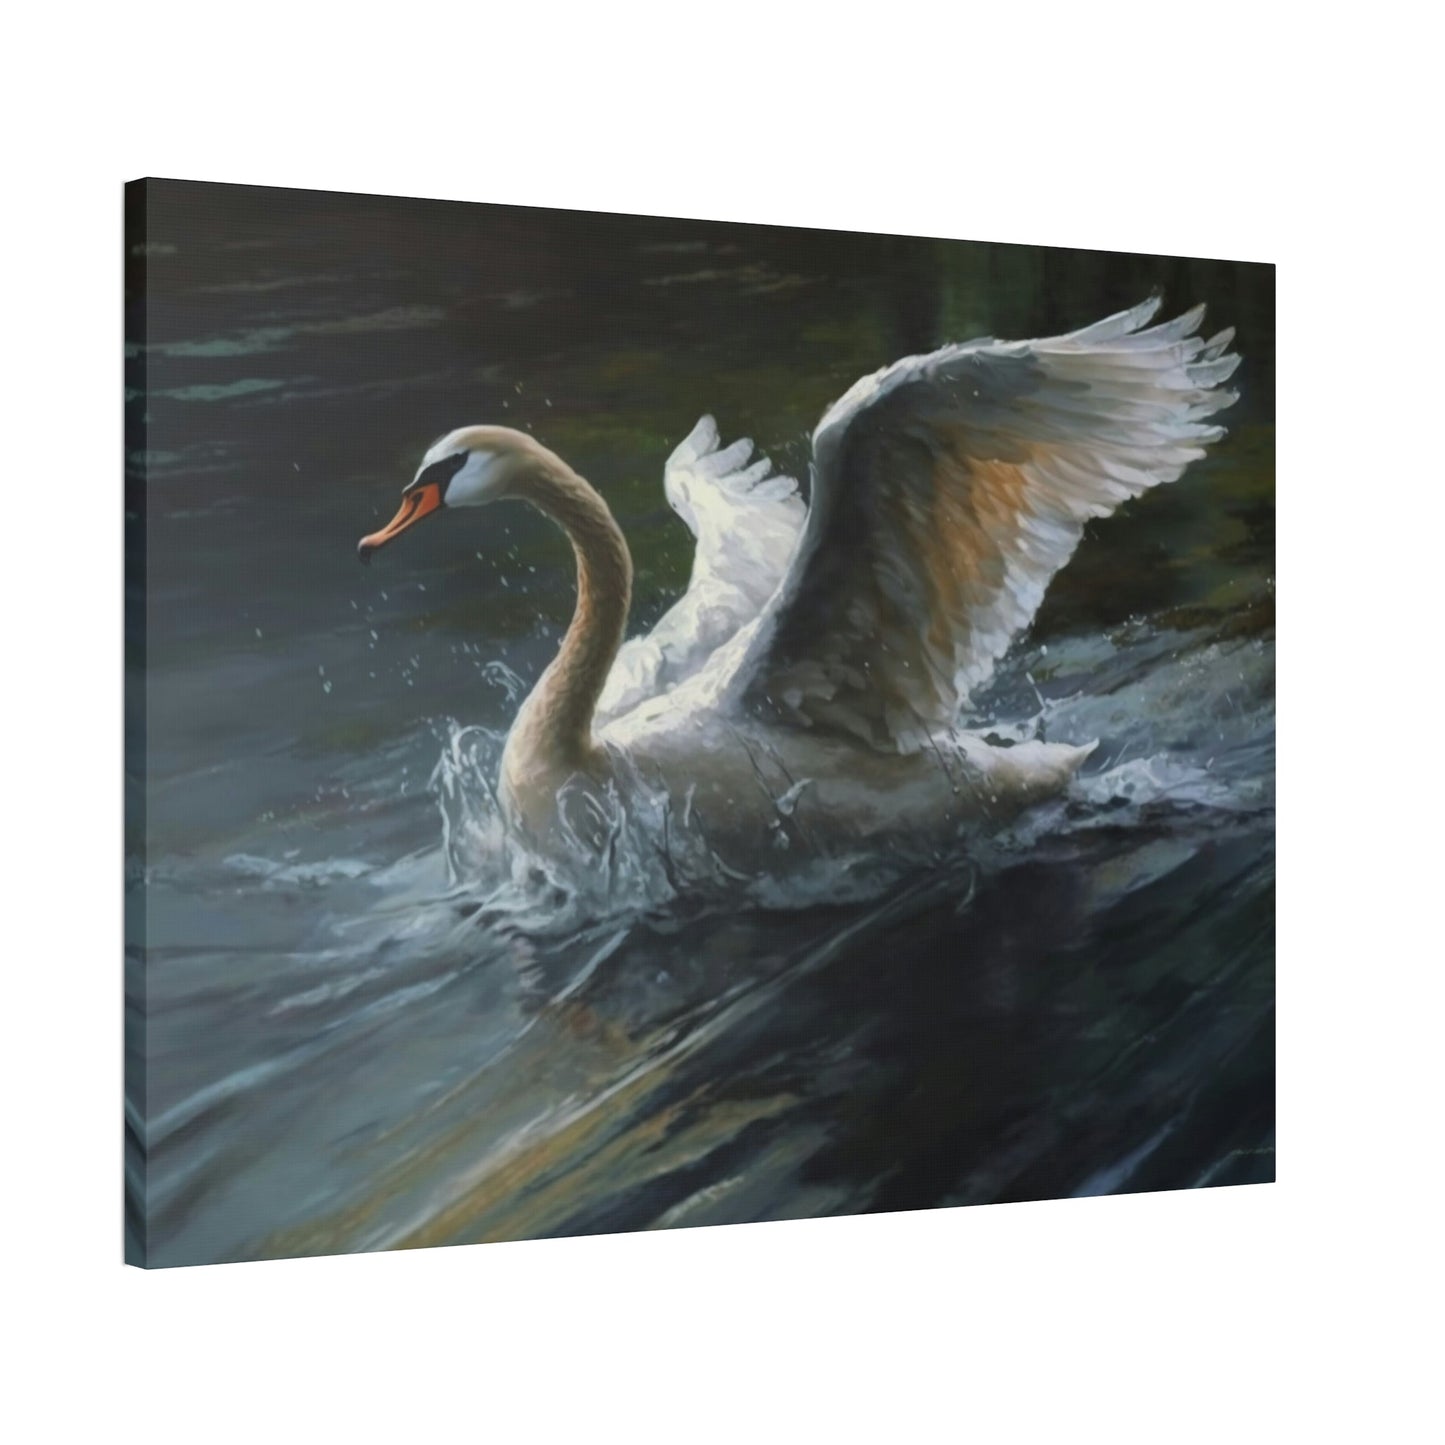 The Swan's Realm: A Nature-Inspired Painting on Canvas